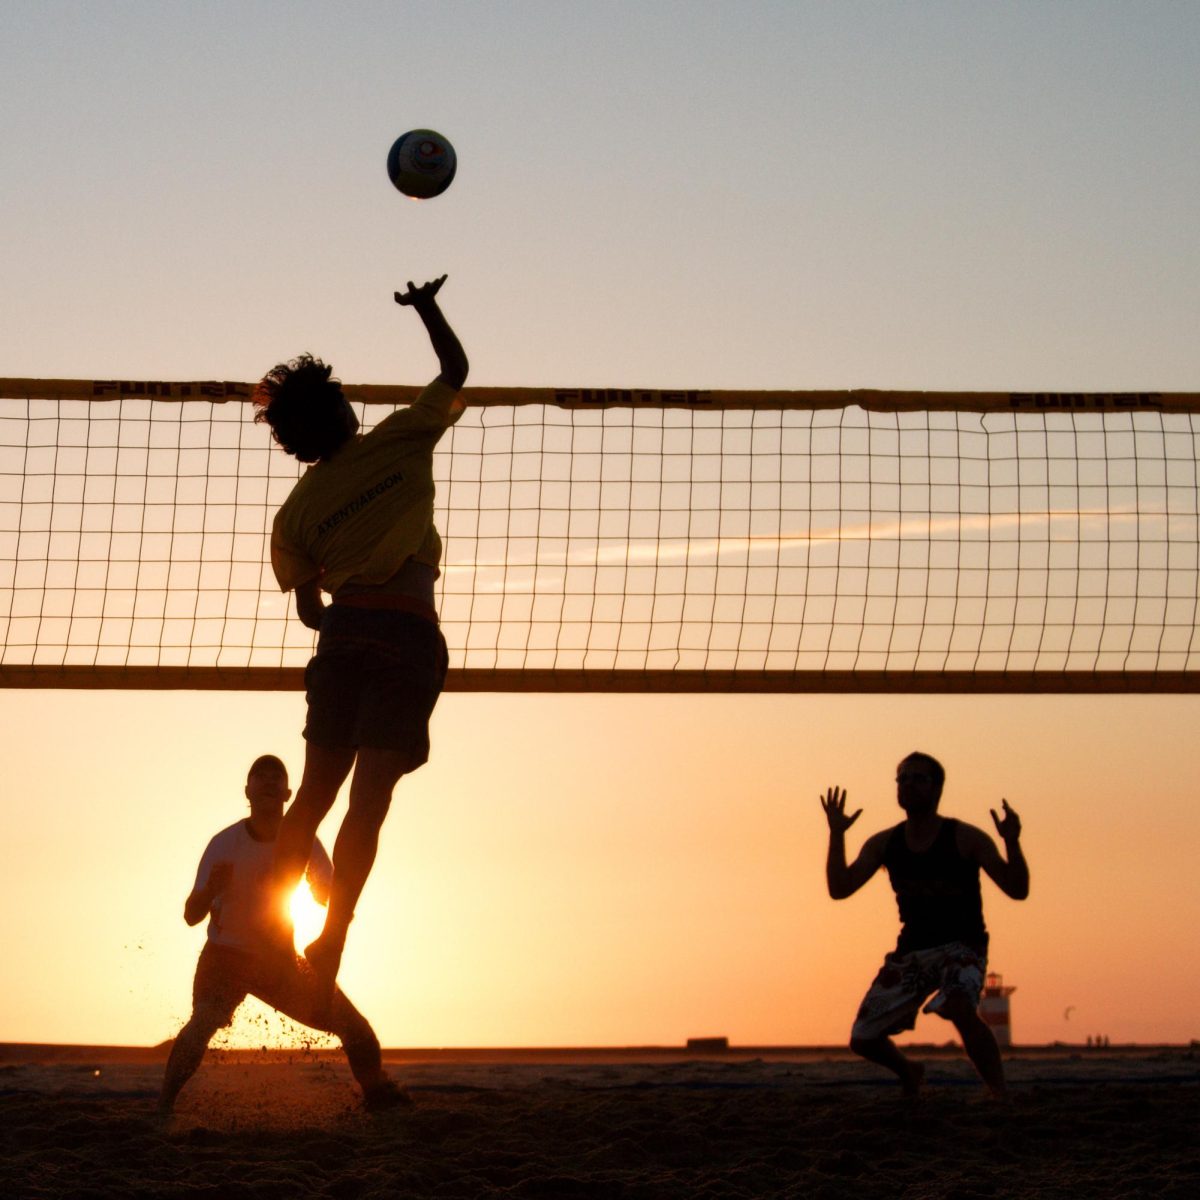 Three+boys+playing+volleyball+for+fun+on+a+beach+with+the+sunset+in+the+background.